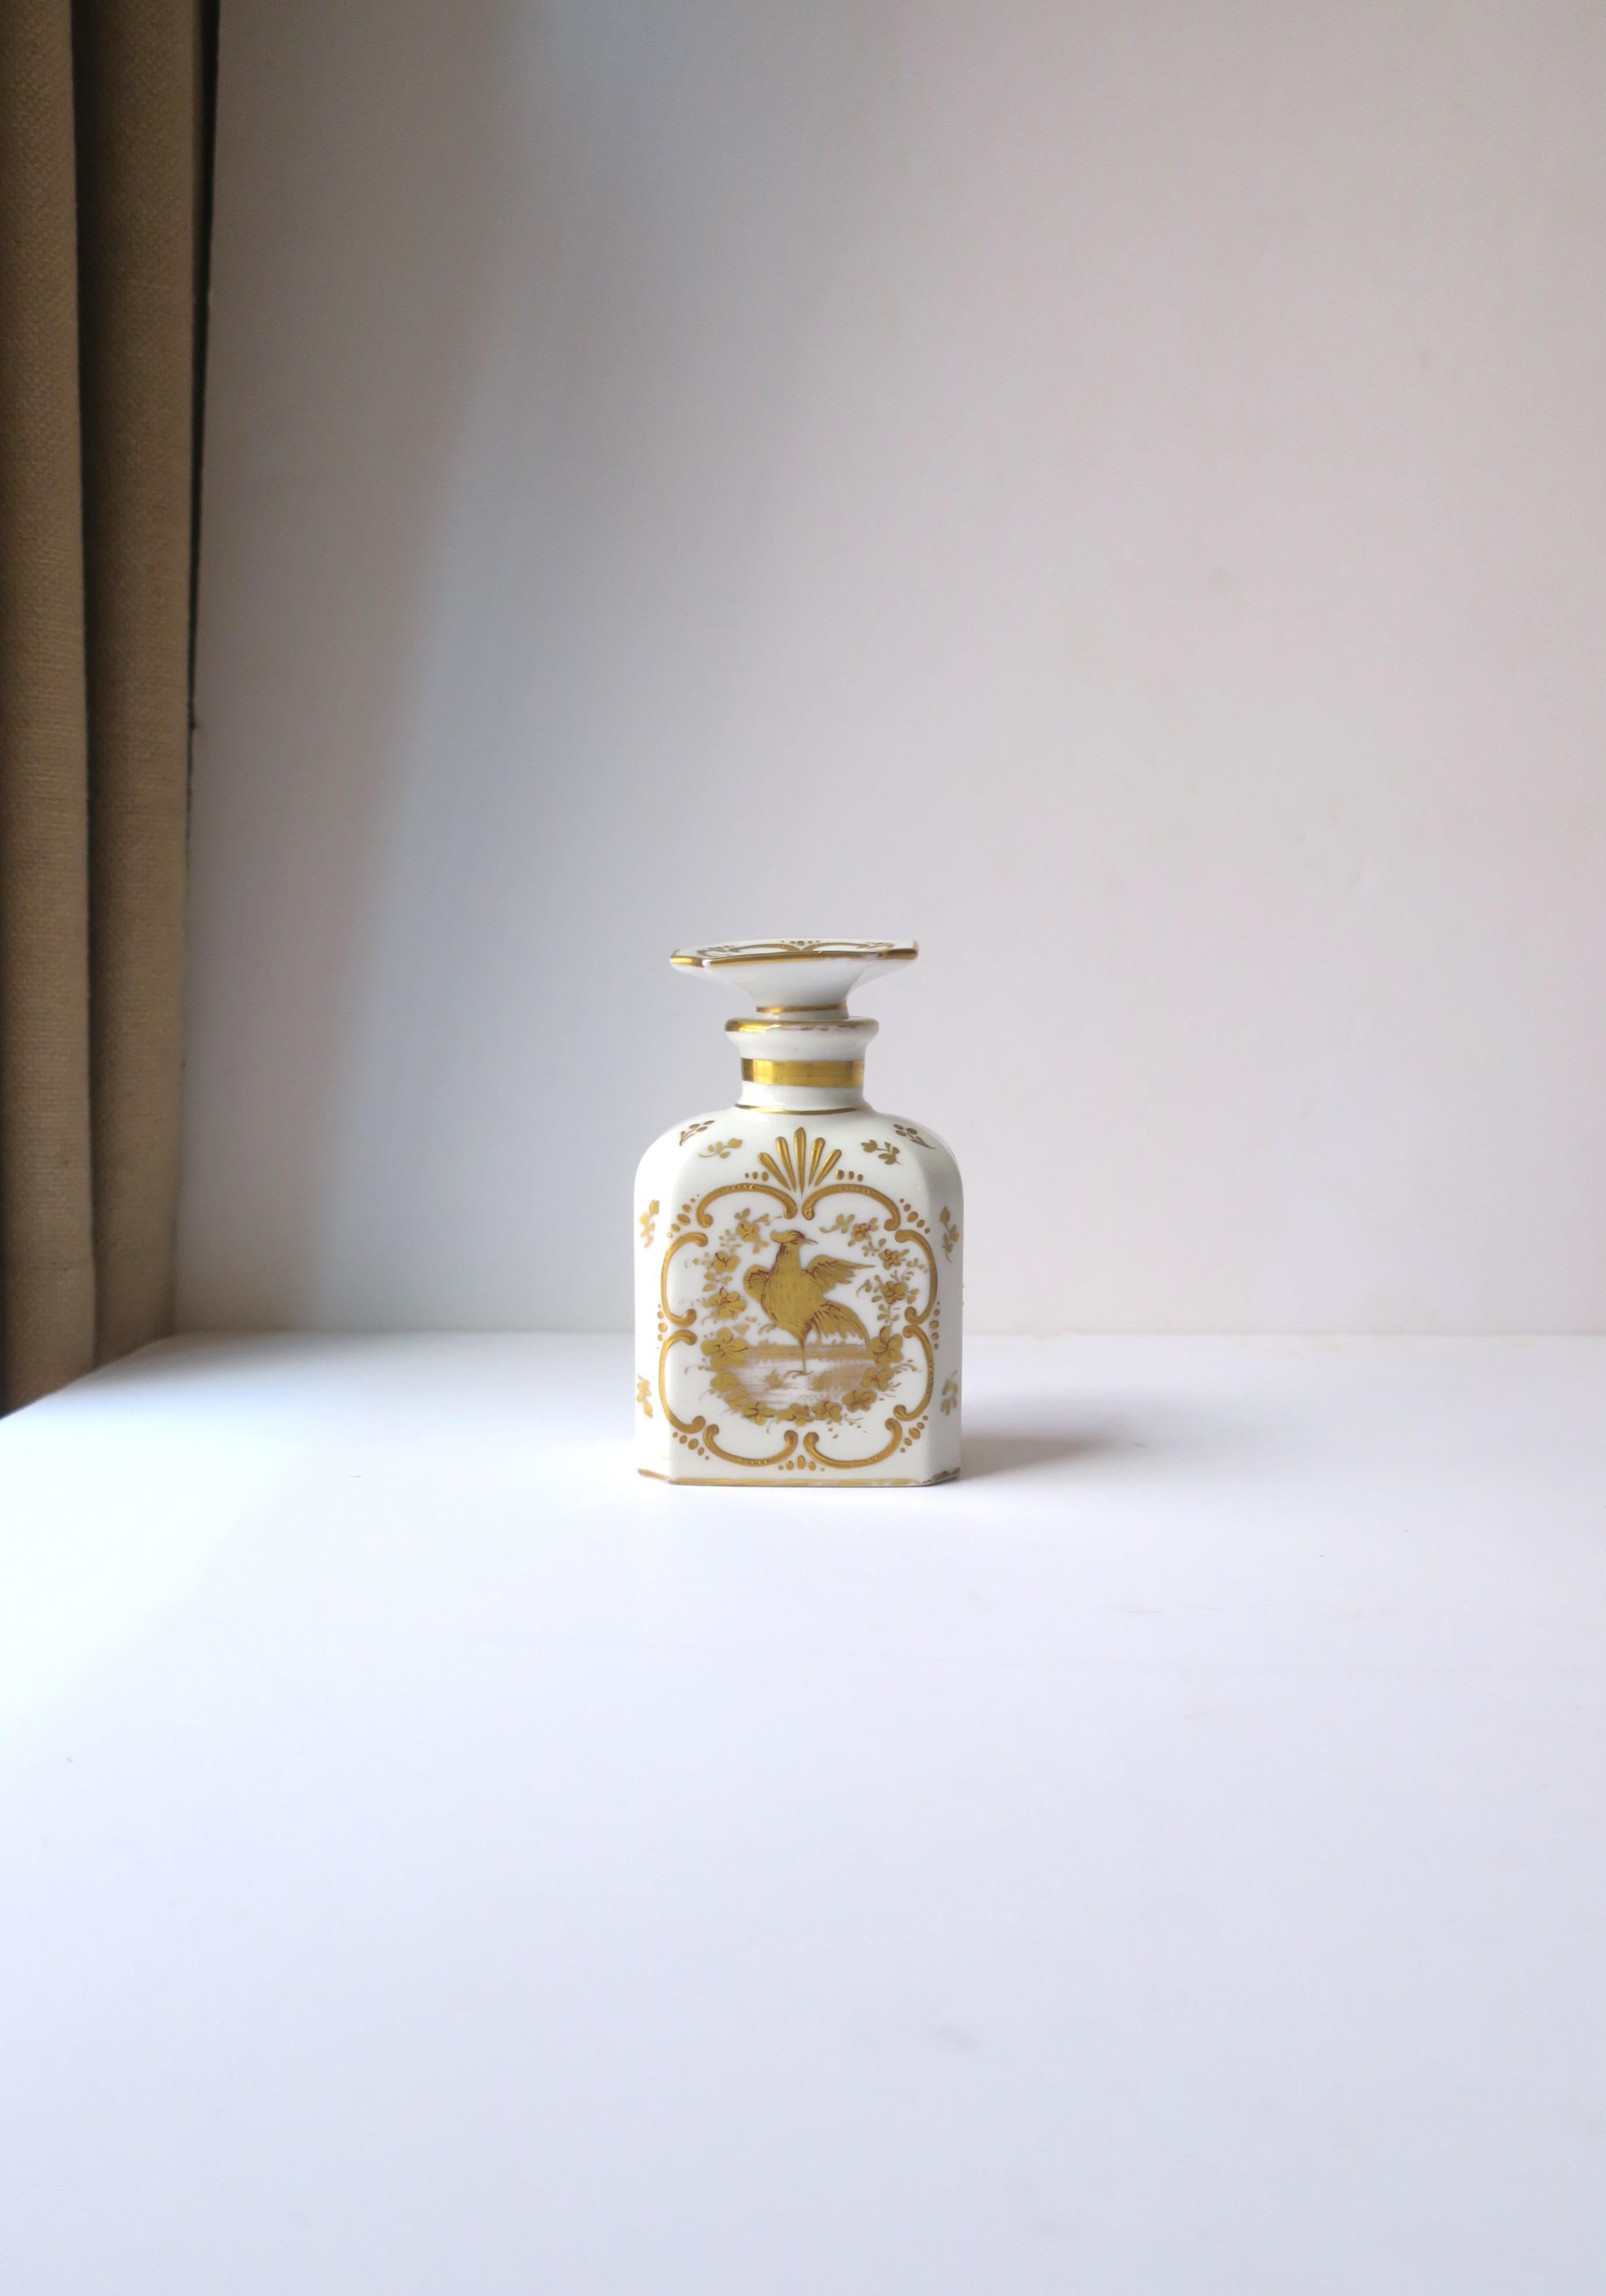 Gilt Italian White and Gold Porcelain Vanity Bottle with Bird Design Rococo Style For Sale